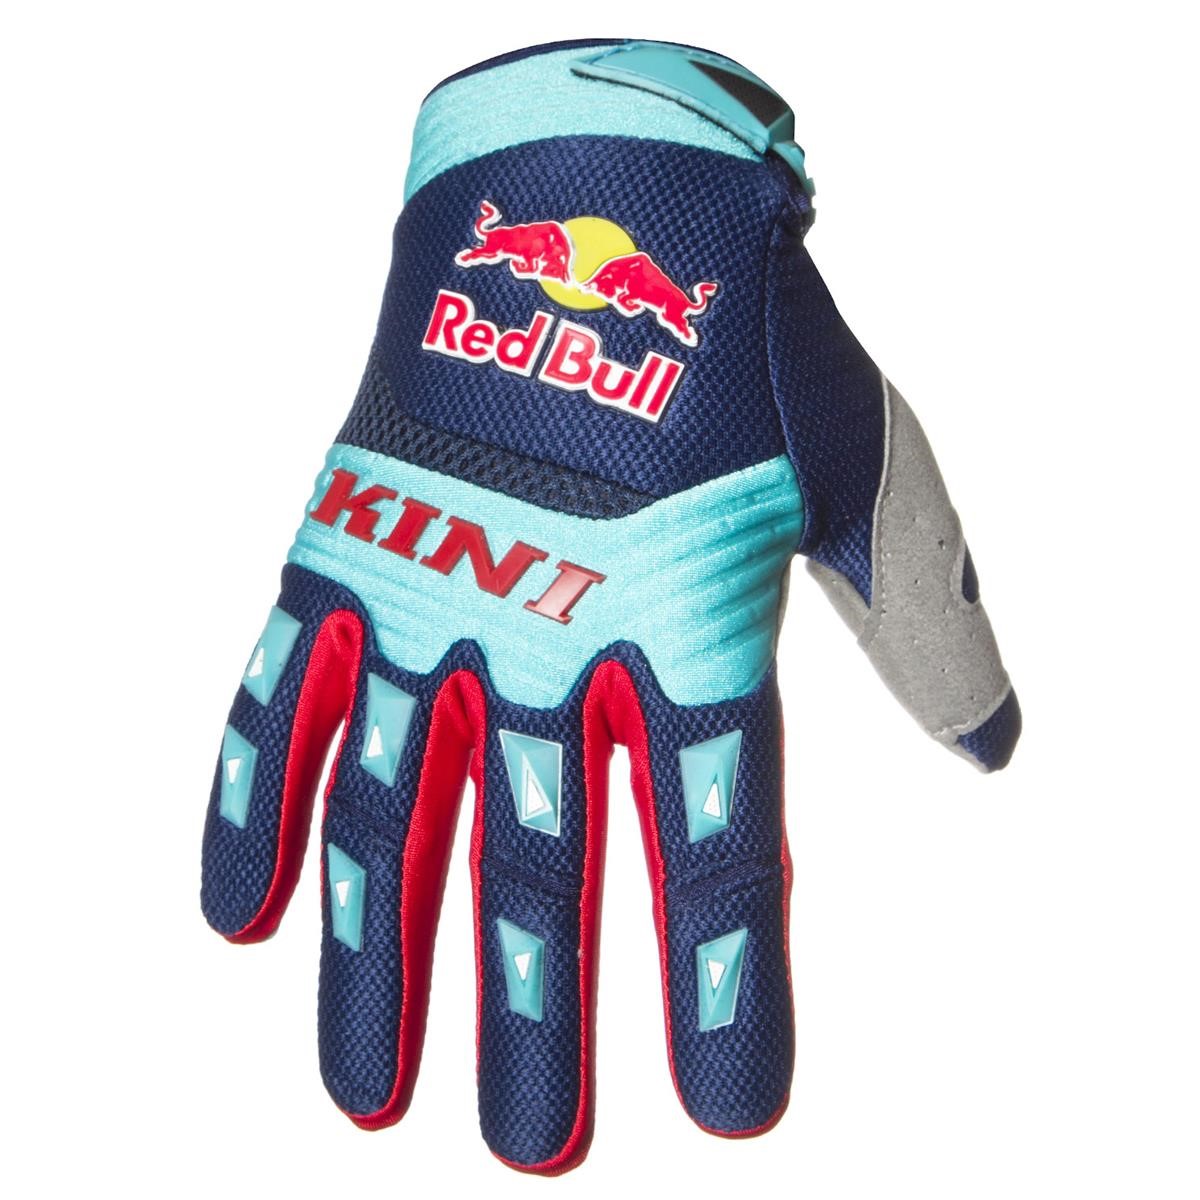 Kini Red Bull Handschuhe Competition Navy/Weiß